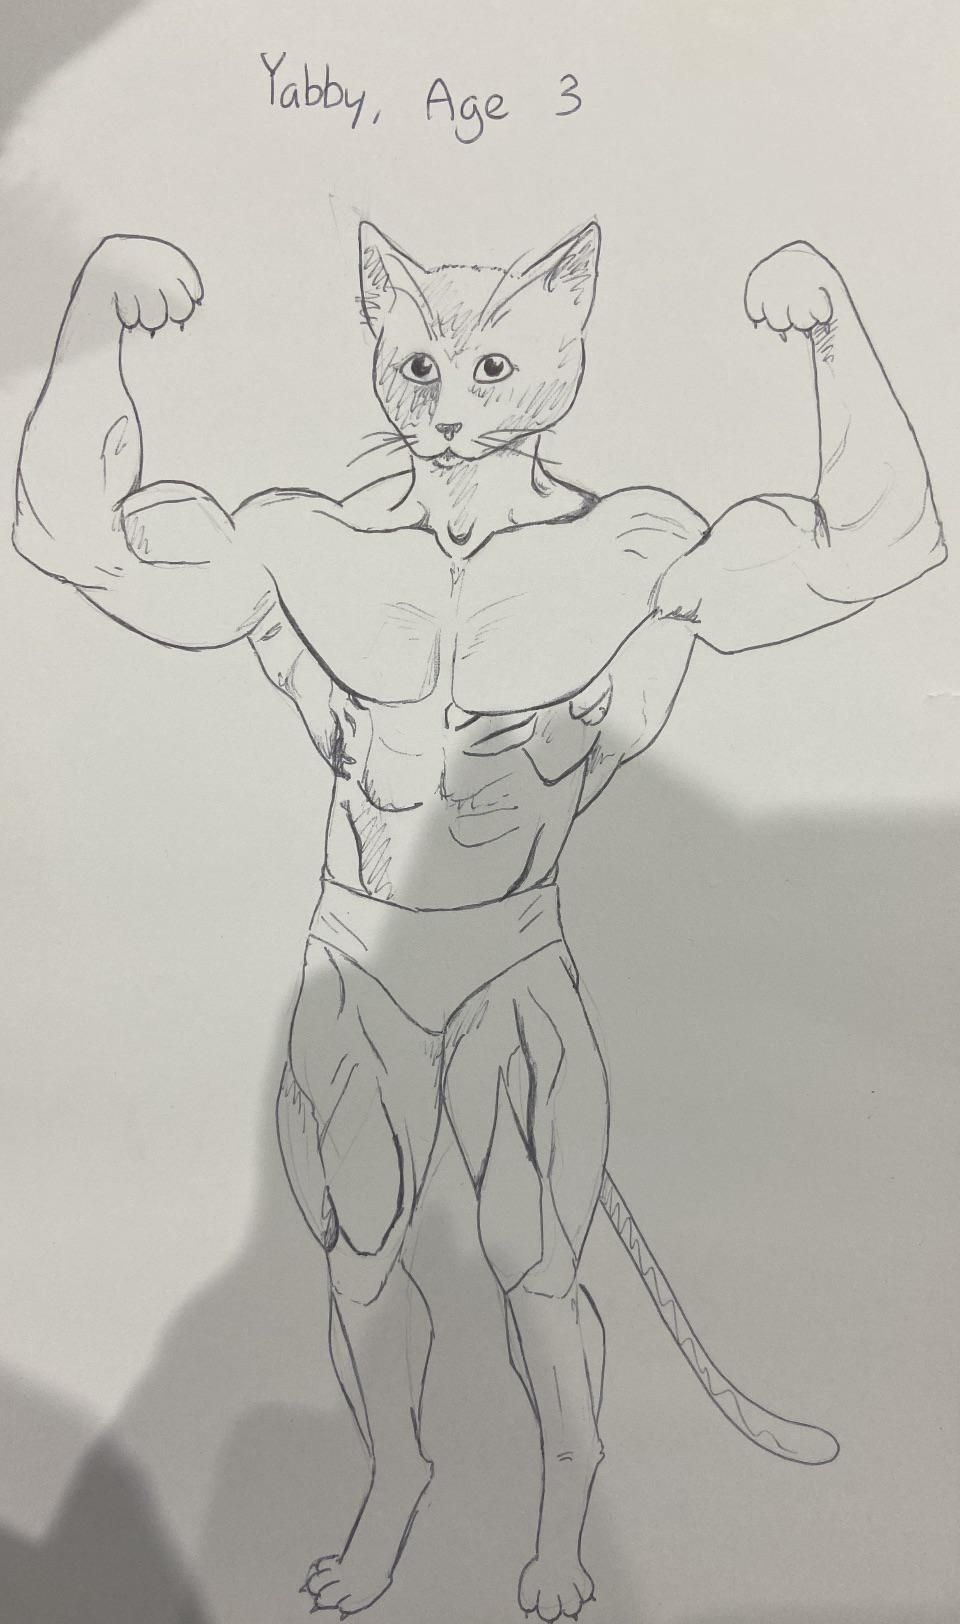 My Girlfriend loves sketching our cats and I came across this one